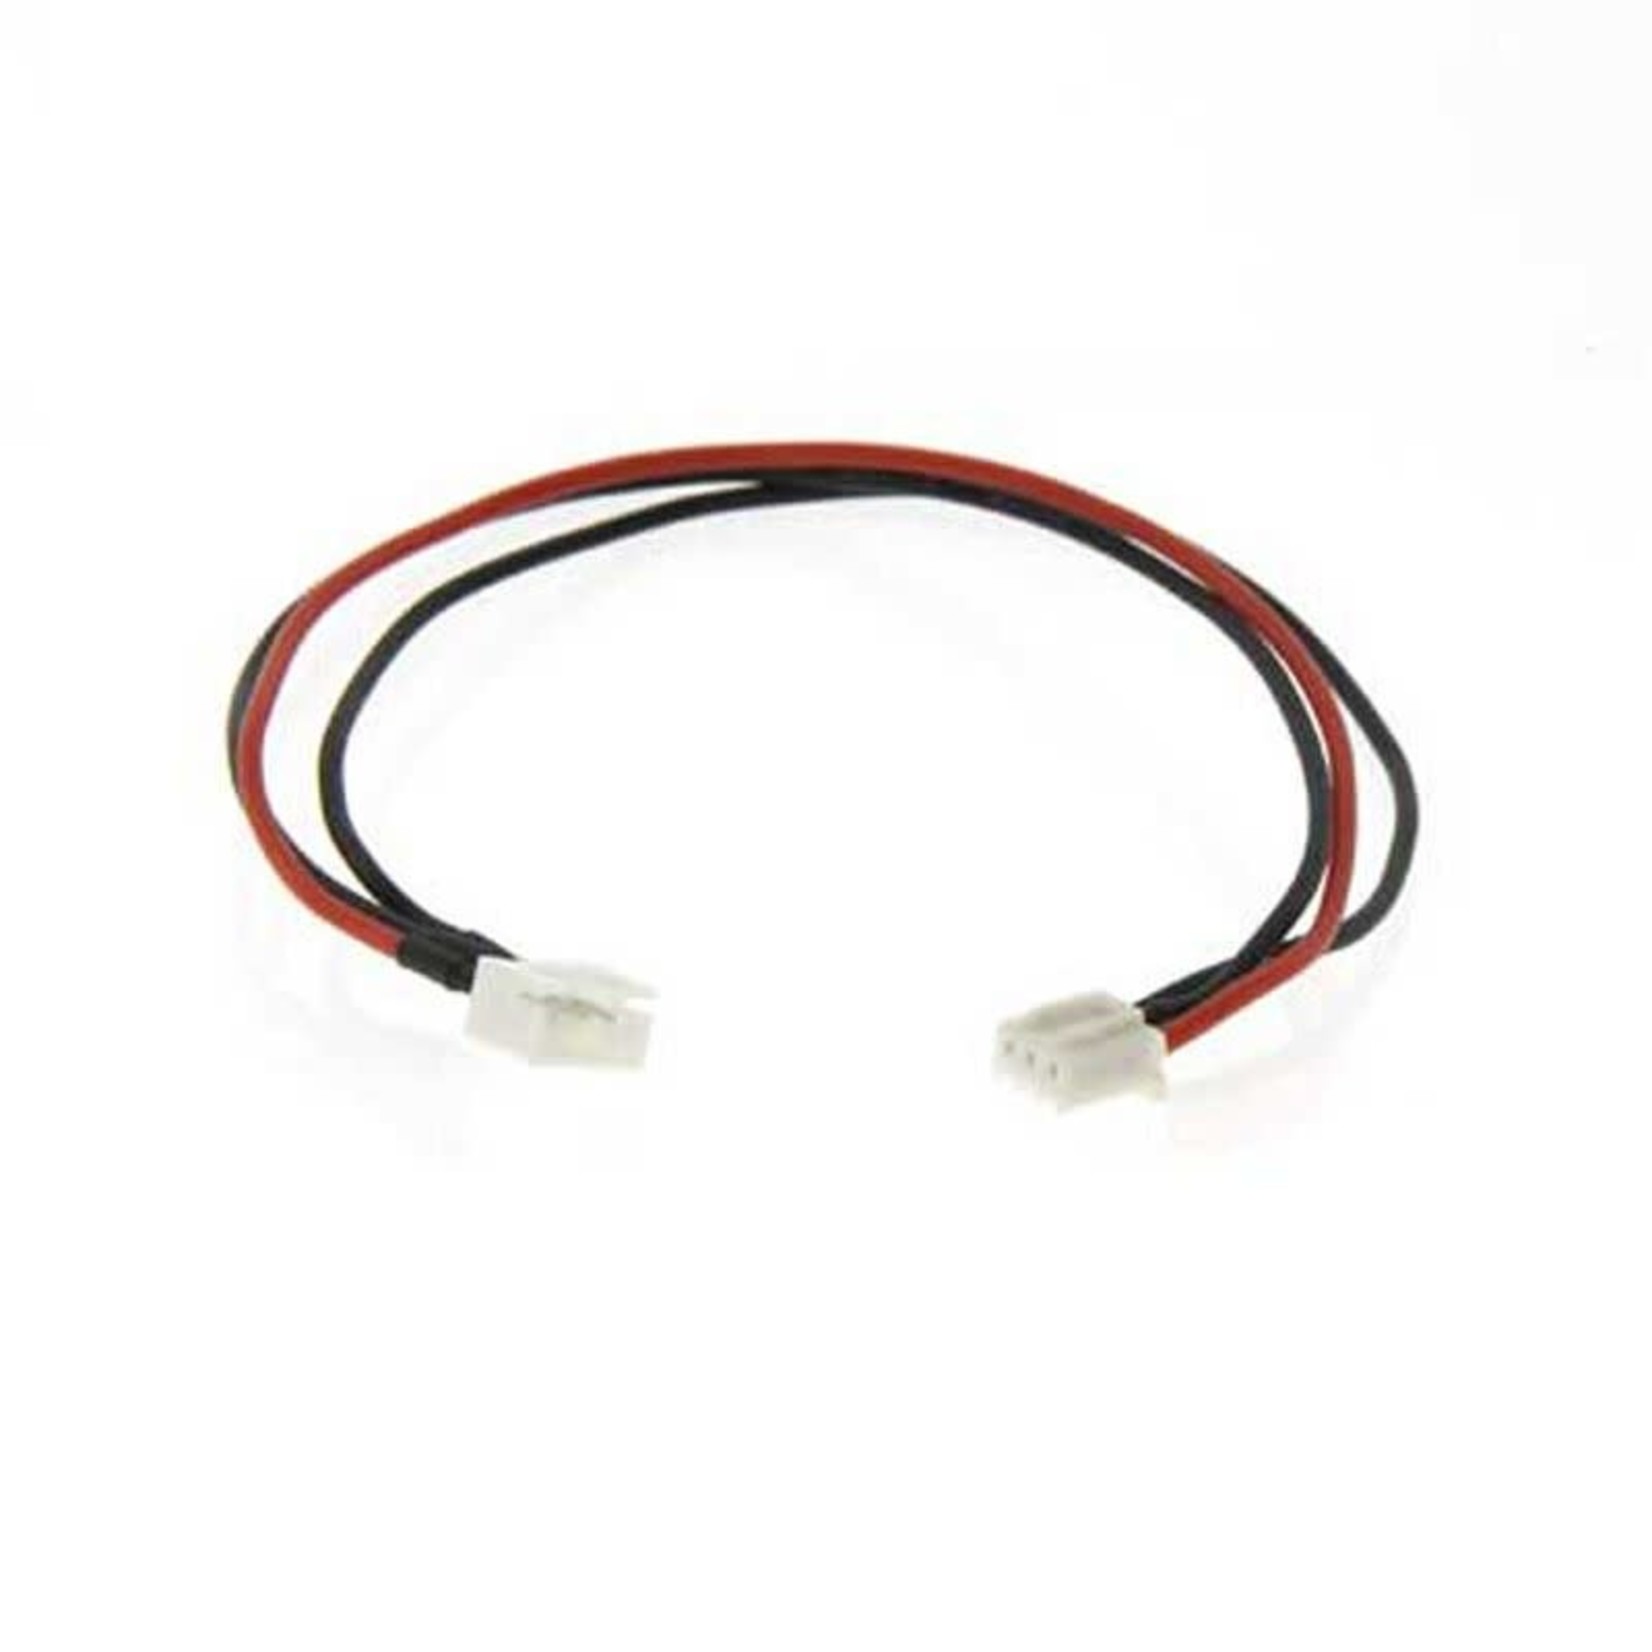 2U Hobby 12" 2S JST- 2S Balance Wire, Male to Female